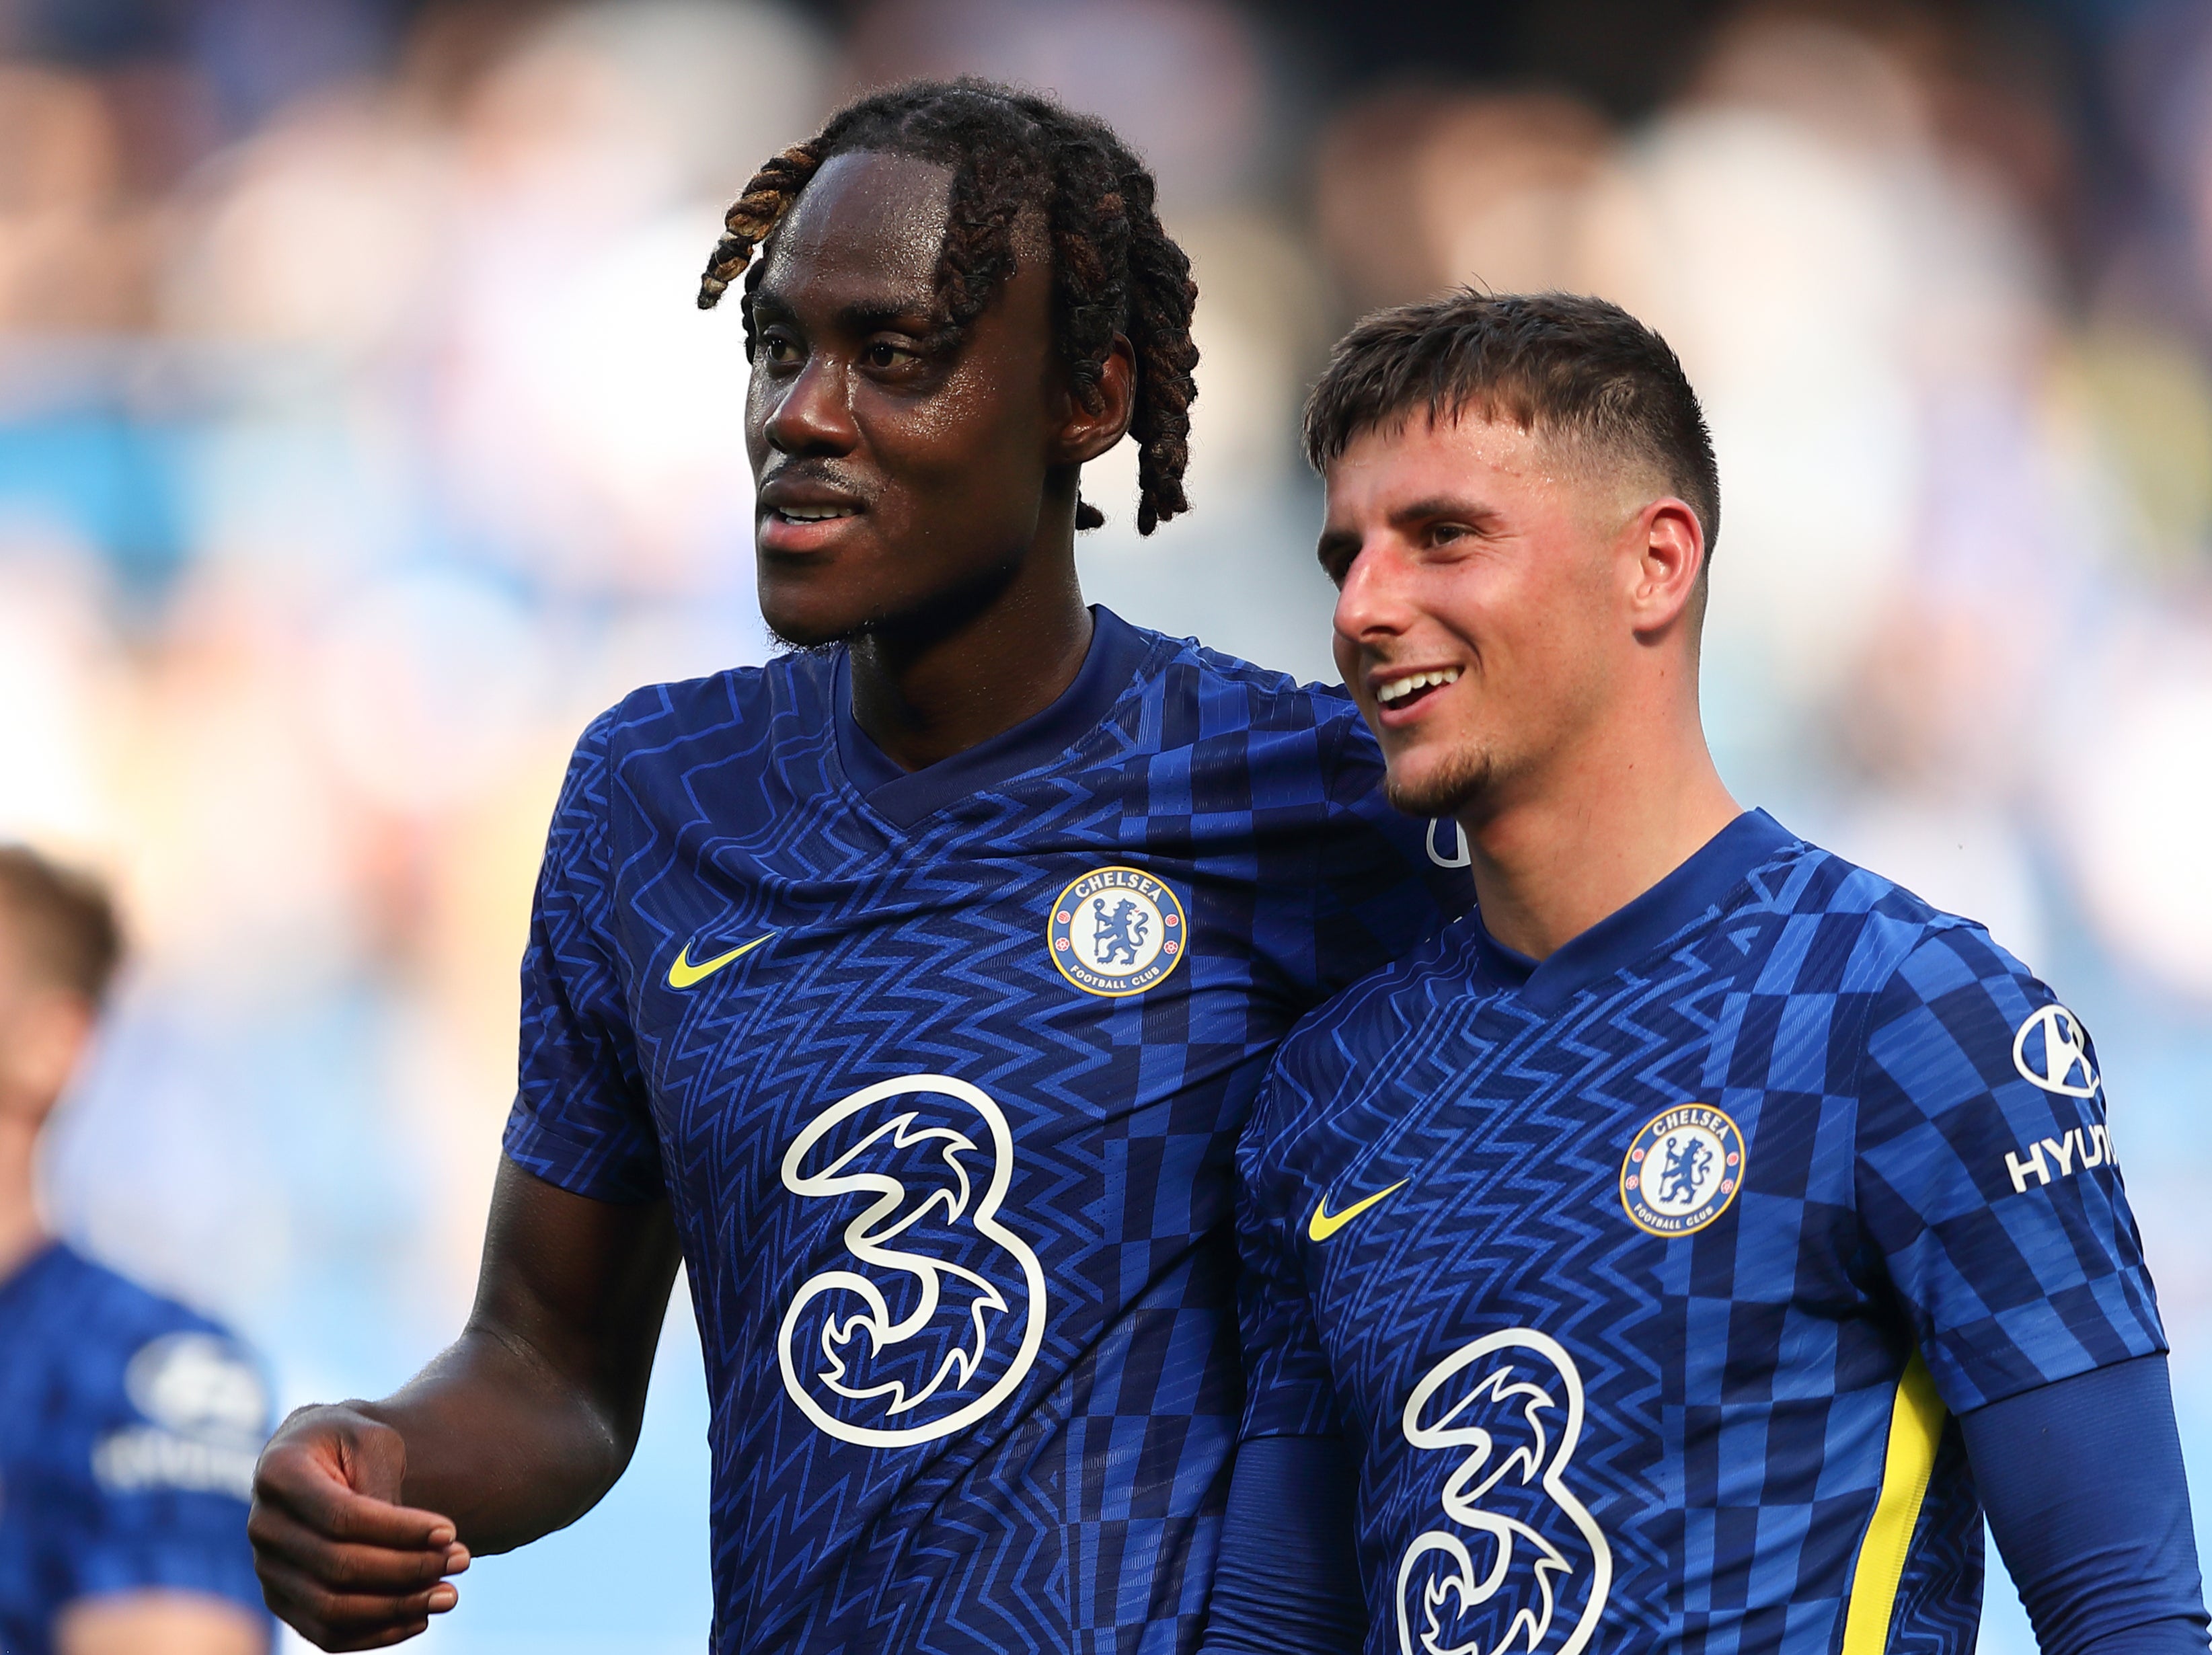 Trevoh Chalobah and Mason Mount react at full-time after Chelsea defeat Crystal Palace